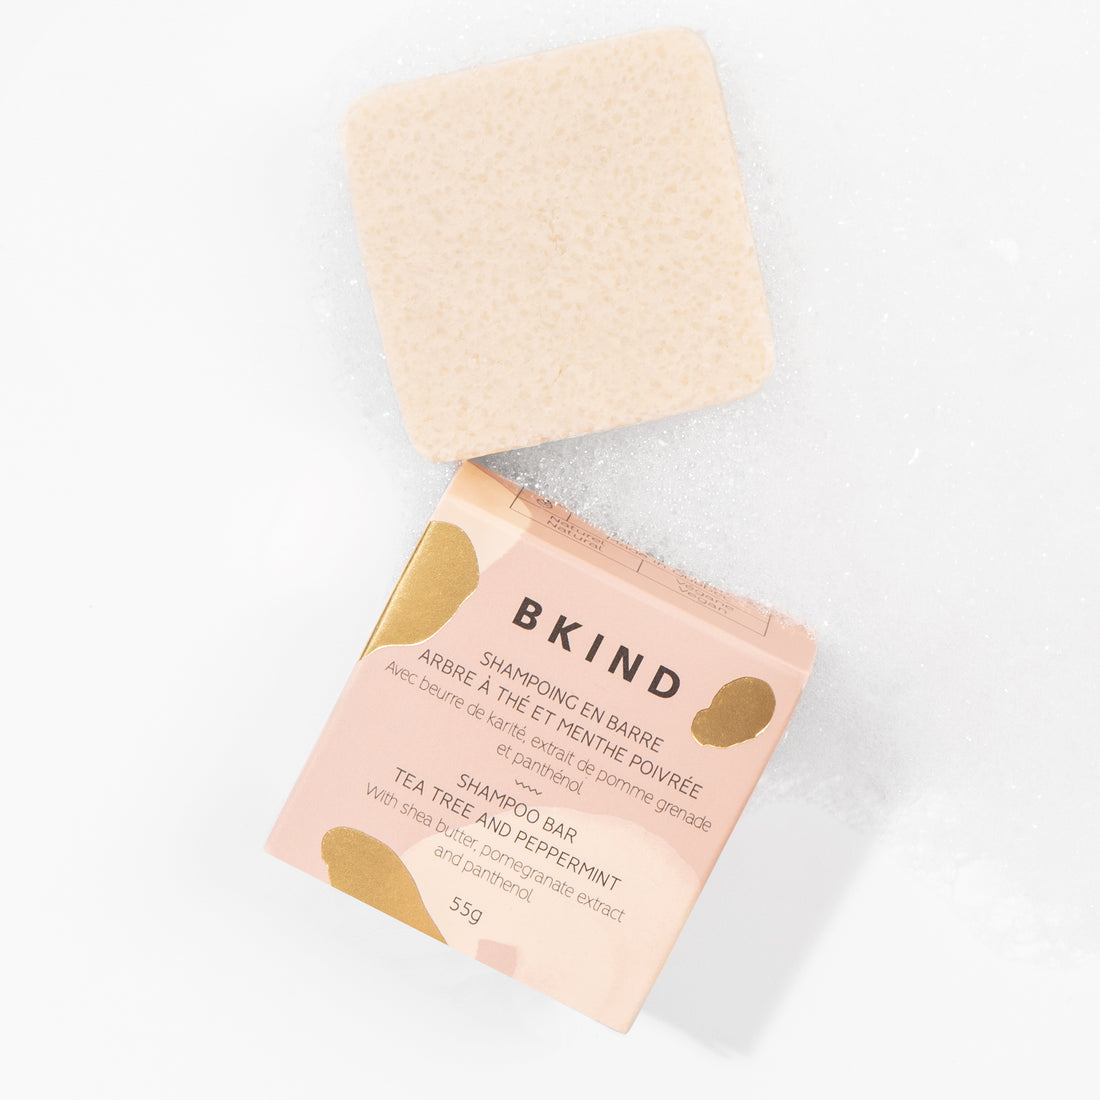 Shampoo bar - Colored or white hair vegan natural sulfate-free BKIND